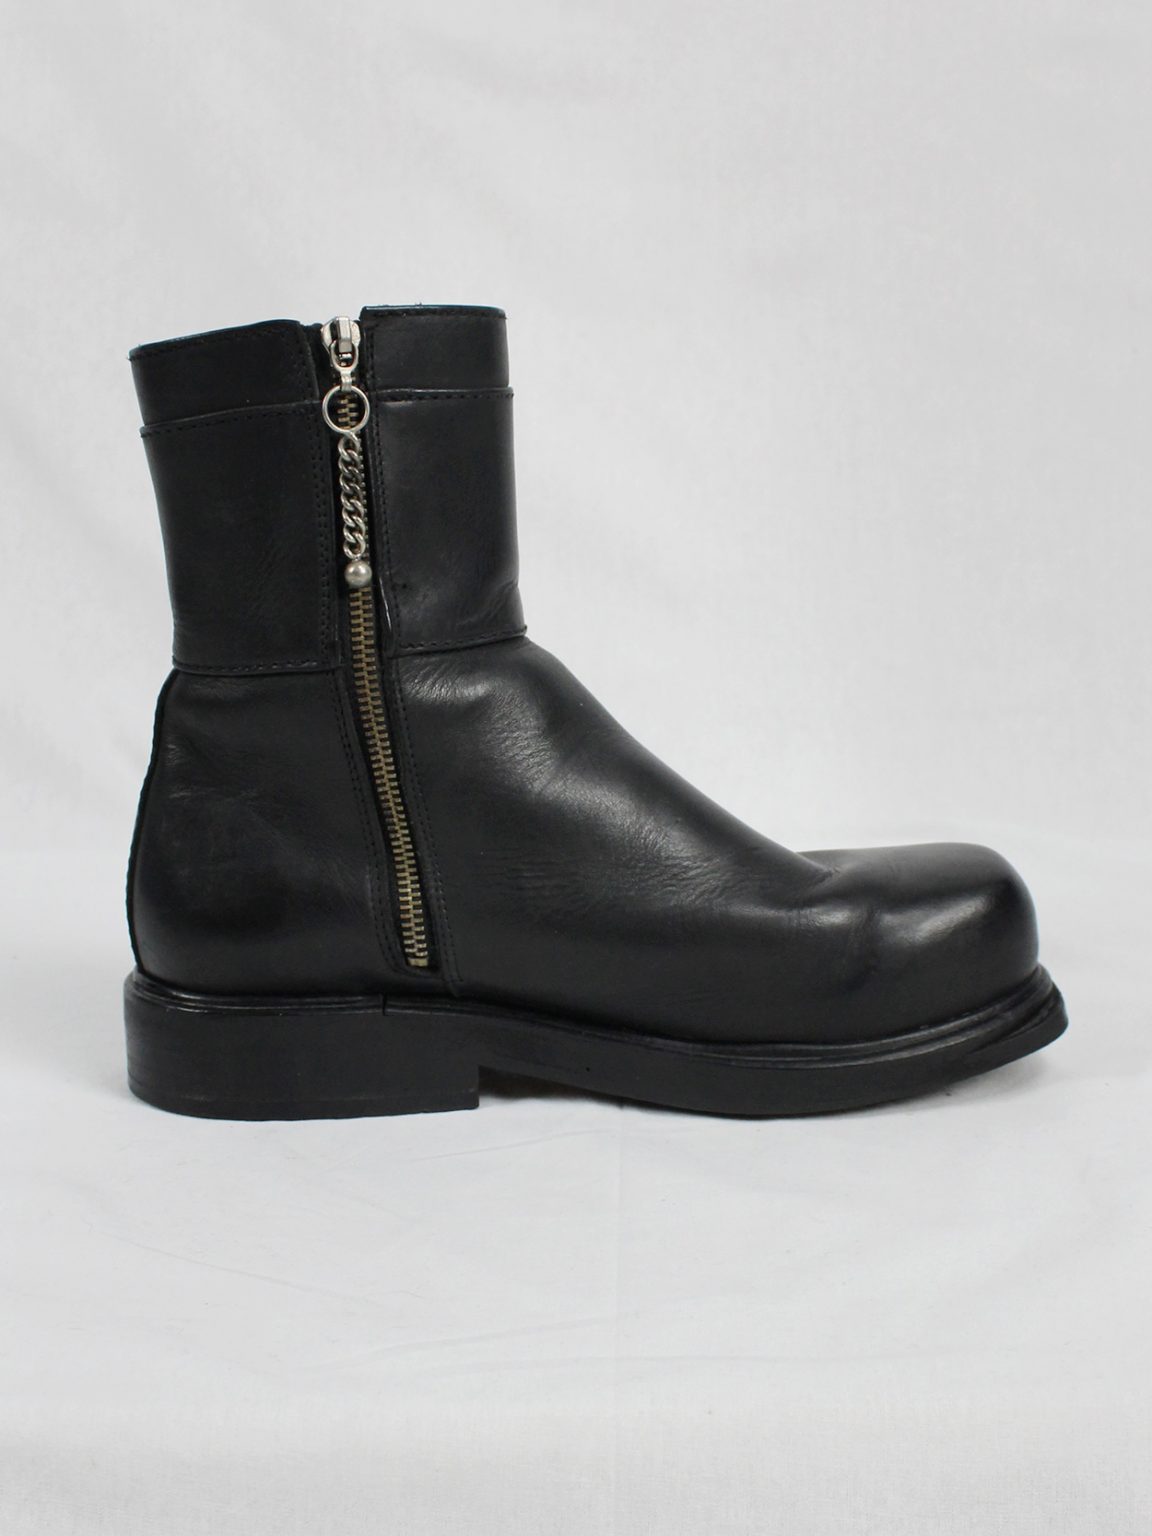 Dirk Bikkembergs black boots with mountaineering tip and brown band (41) — late 90's